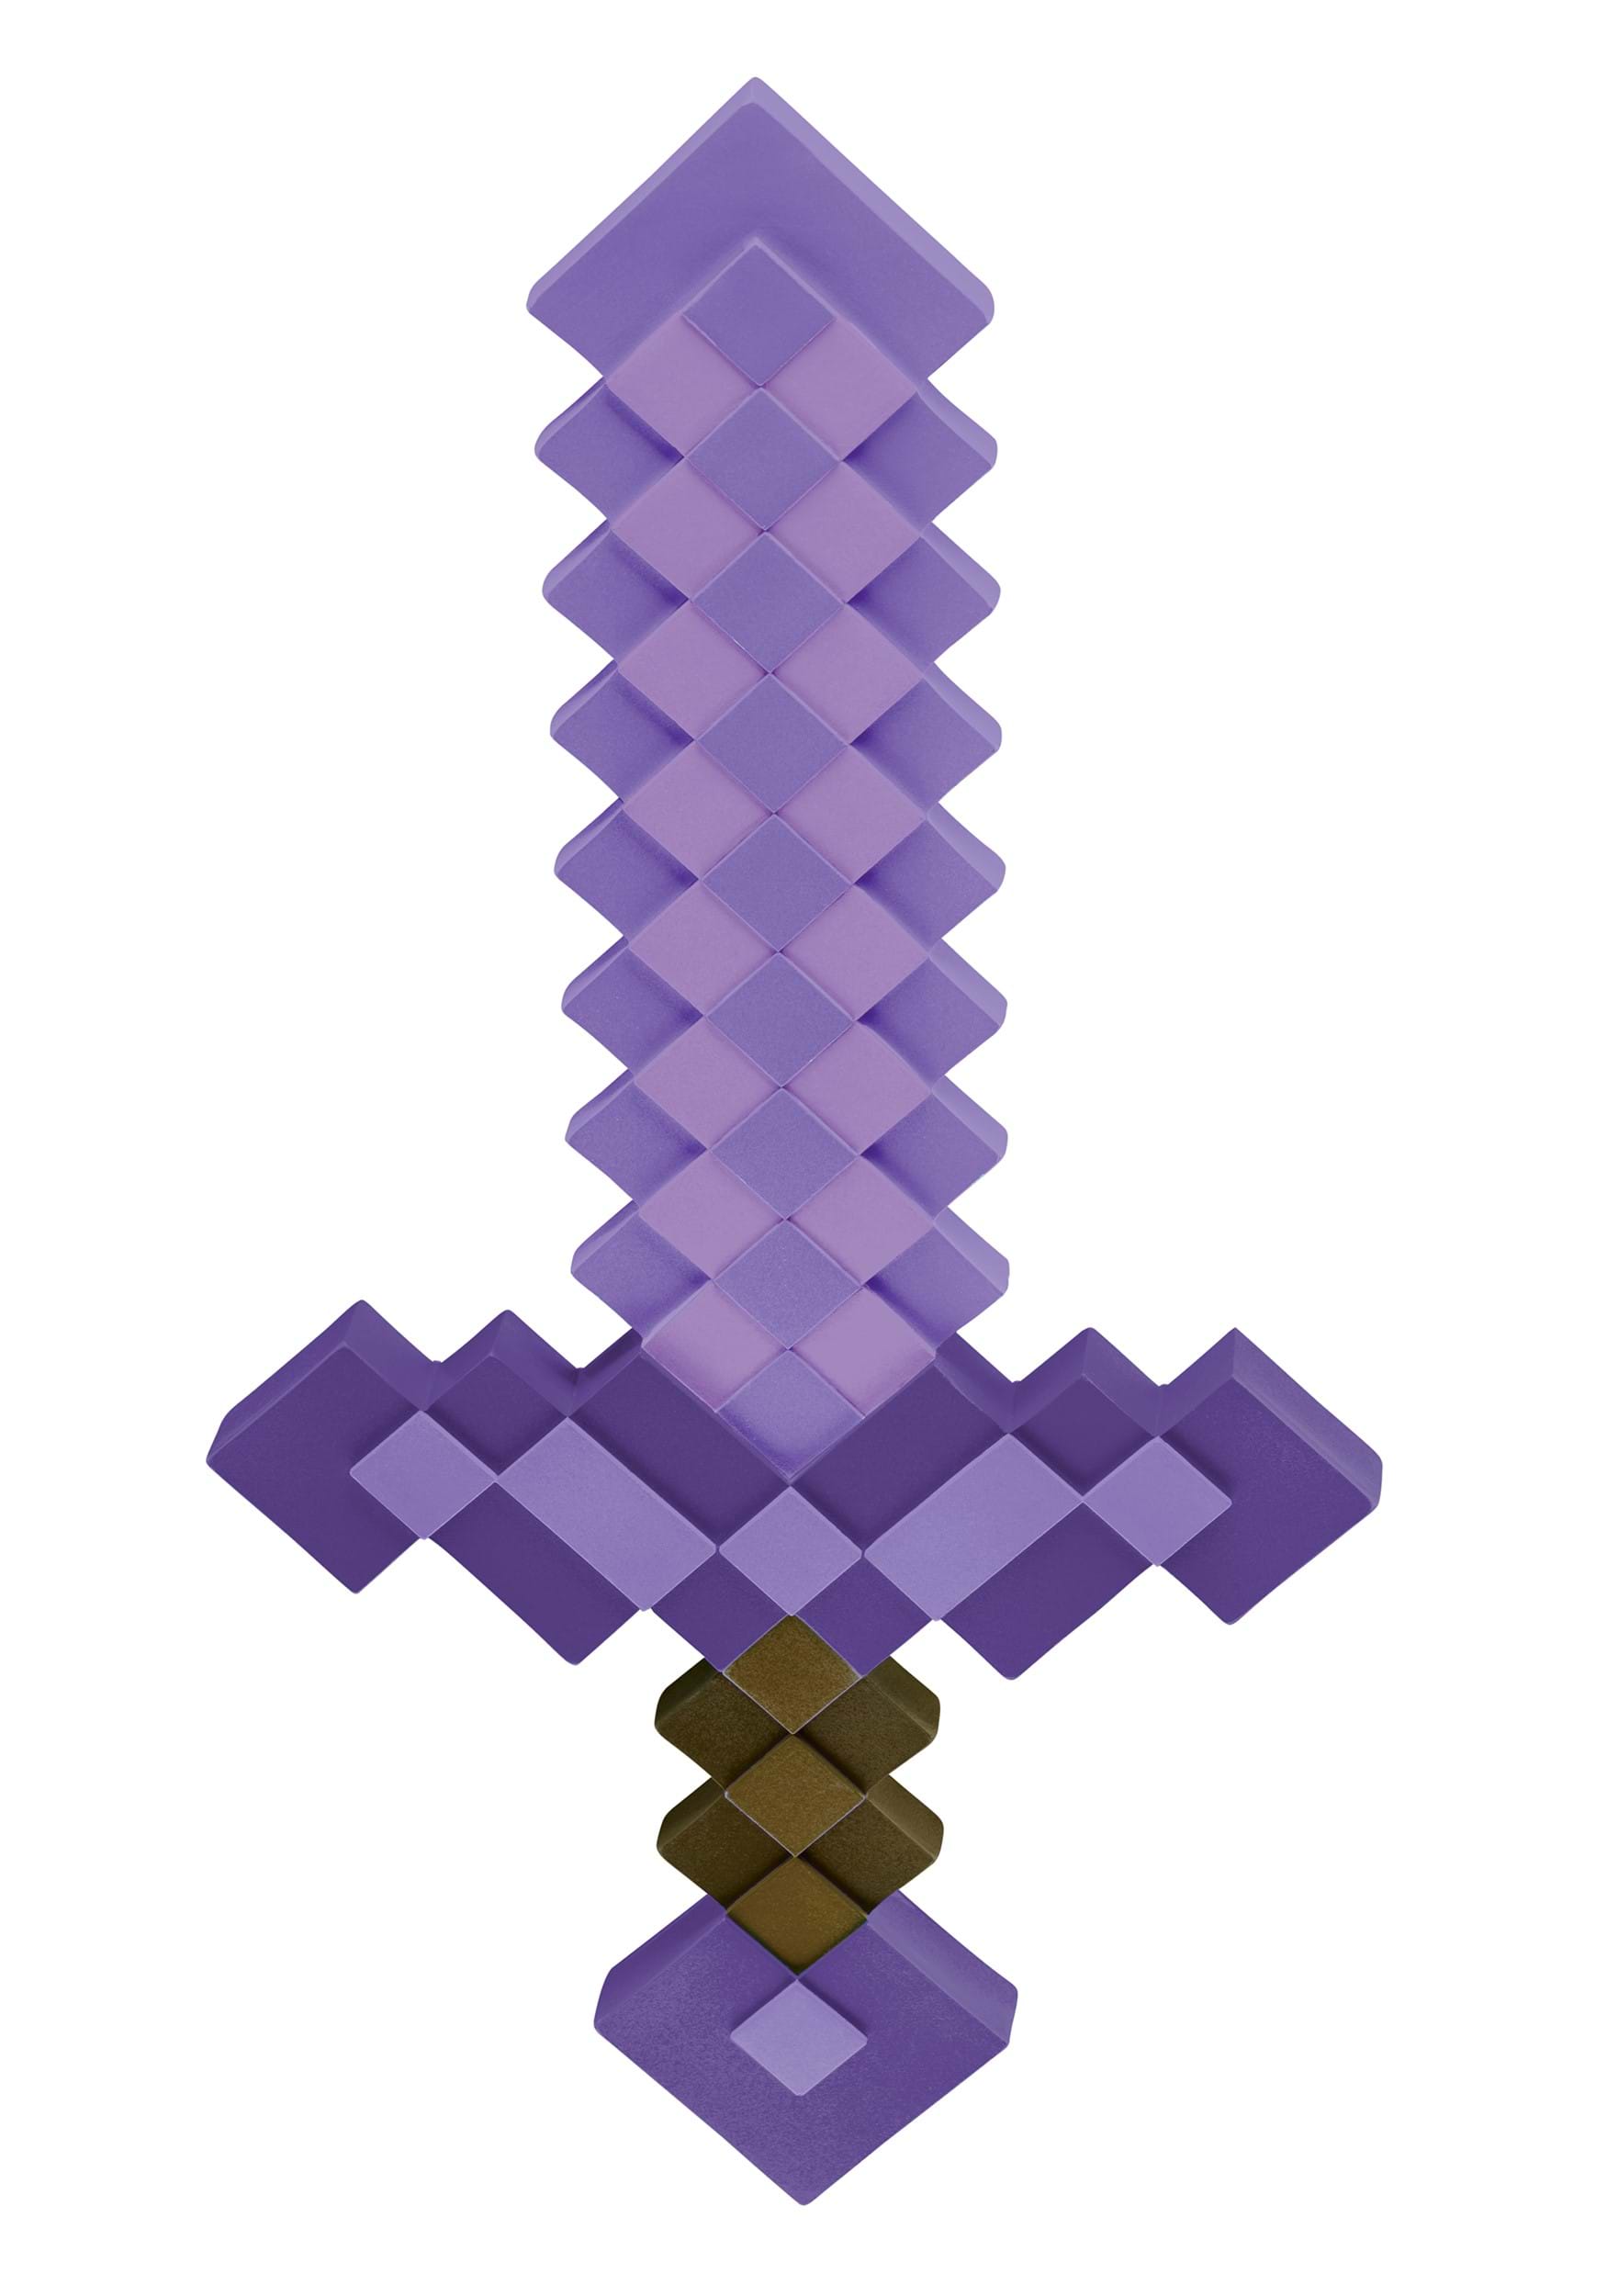 https://images.halloweencostumes.com/products/66134/1-1/minecraft-enchanted-purple-sword-toy-main1.jpg